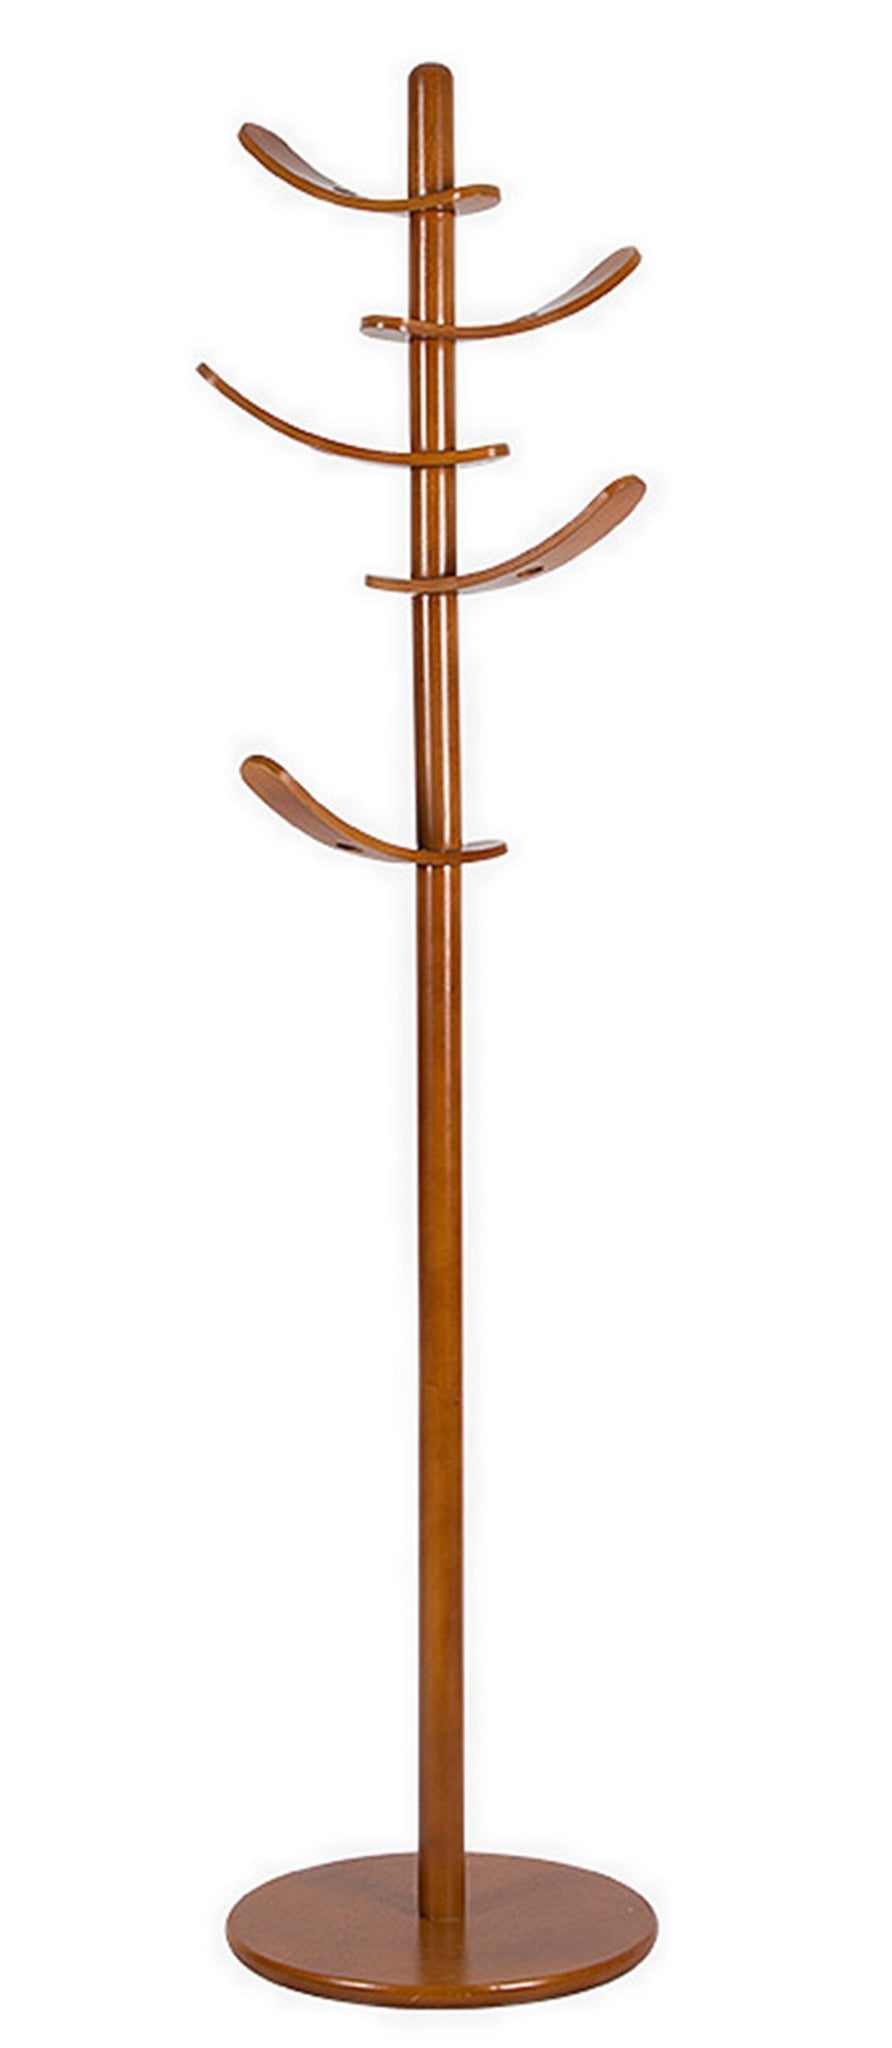 Organize with yakers collection sturdy free standing coat rack with 6 sail rotated hooks round base rubber wood hall tree for kids walnut